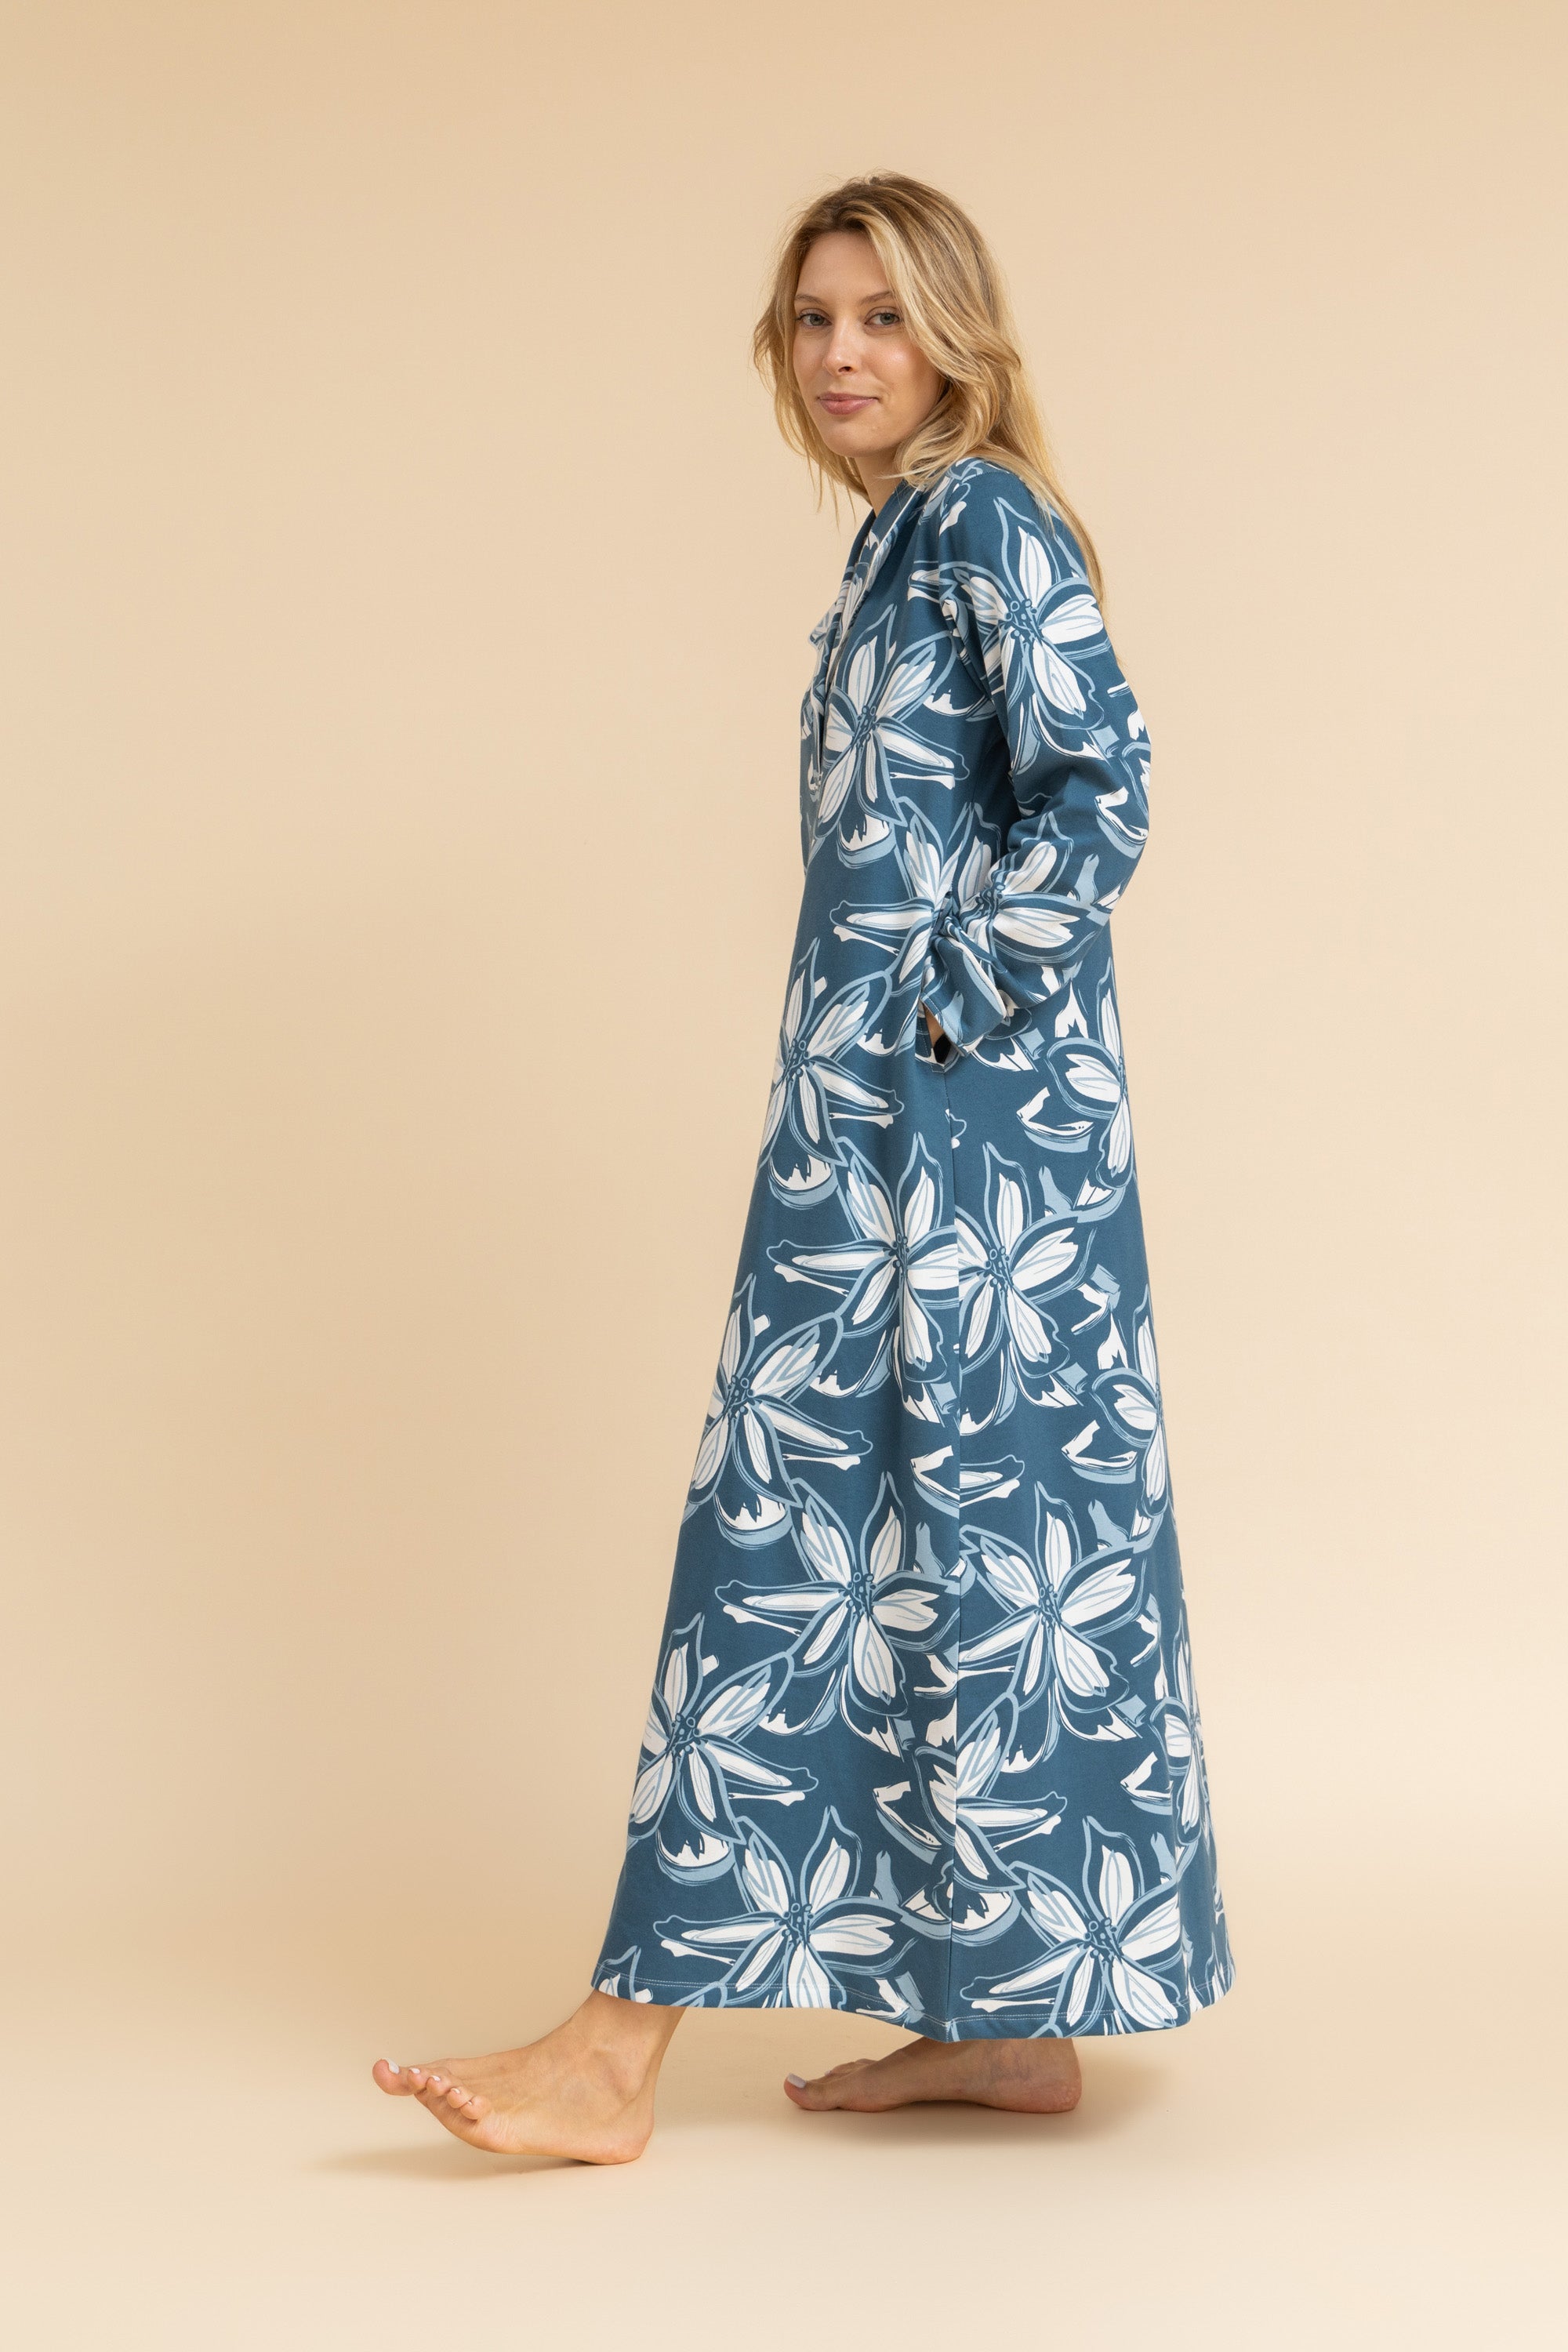 Floral strokes Long Sleeve Nightdress